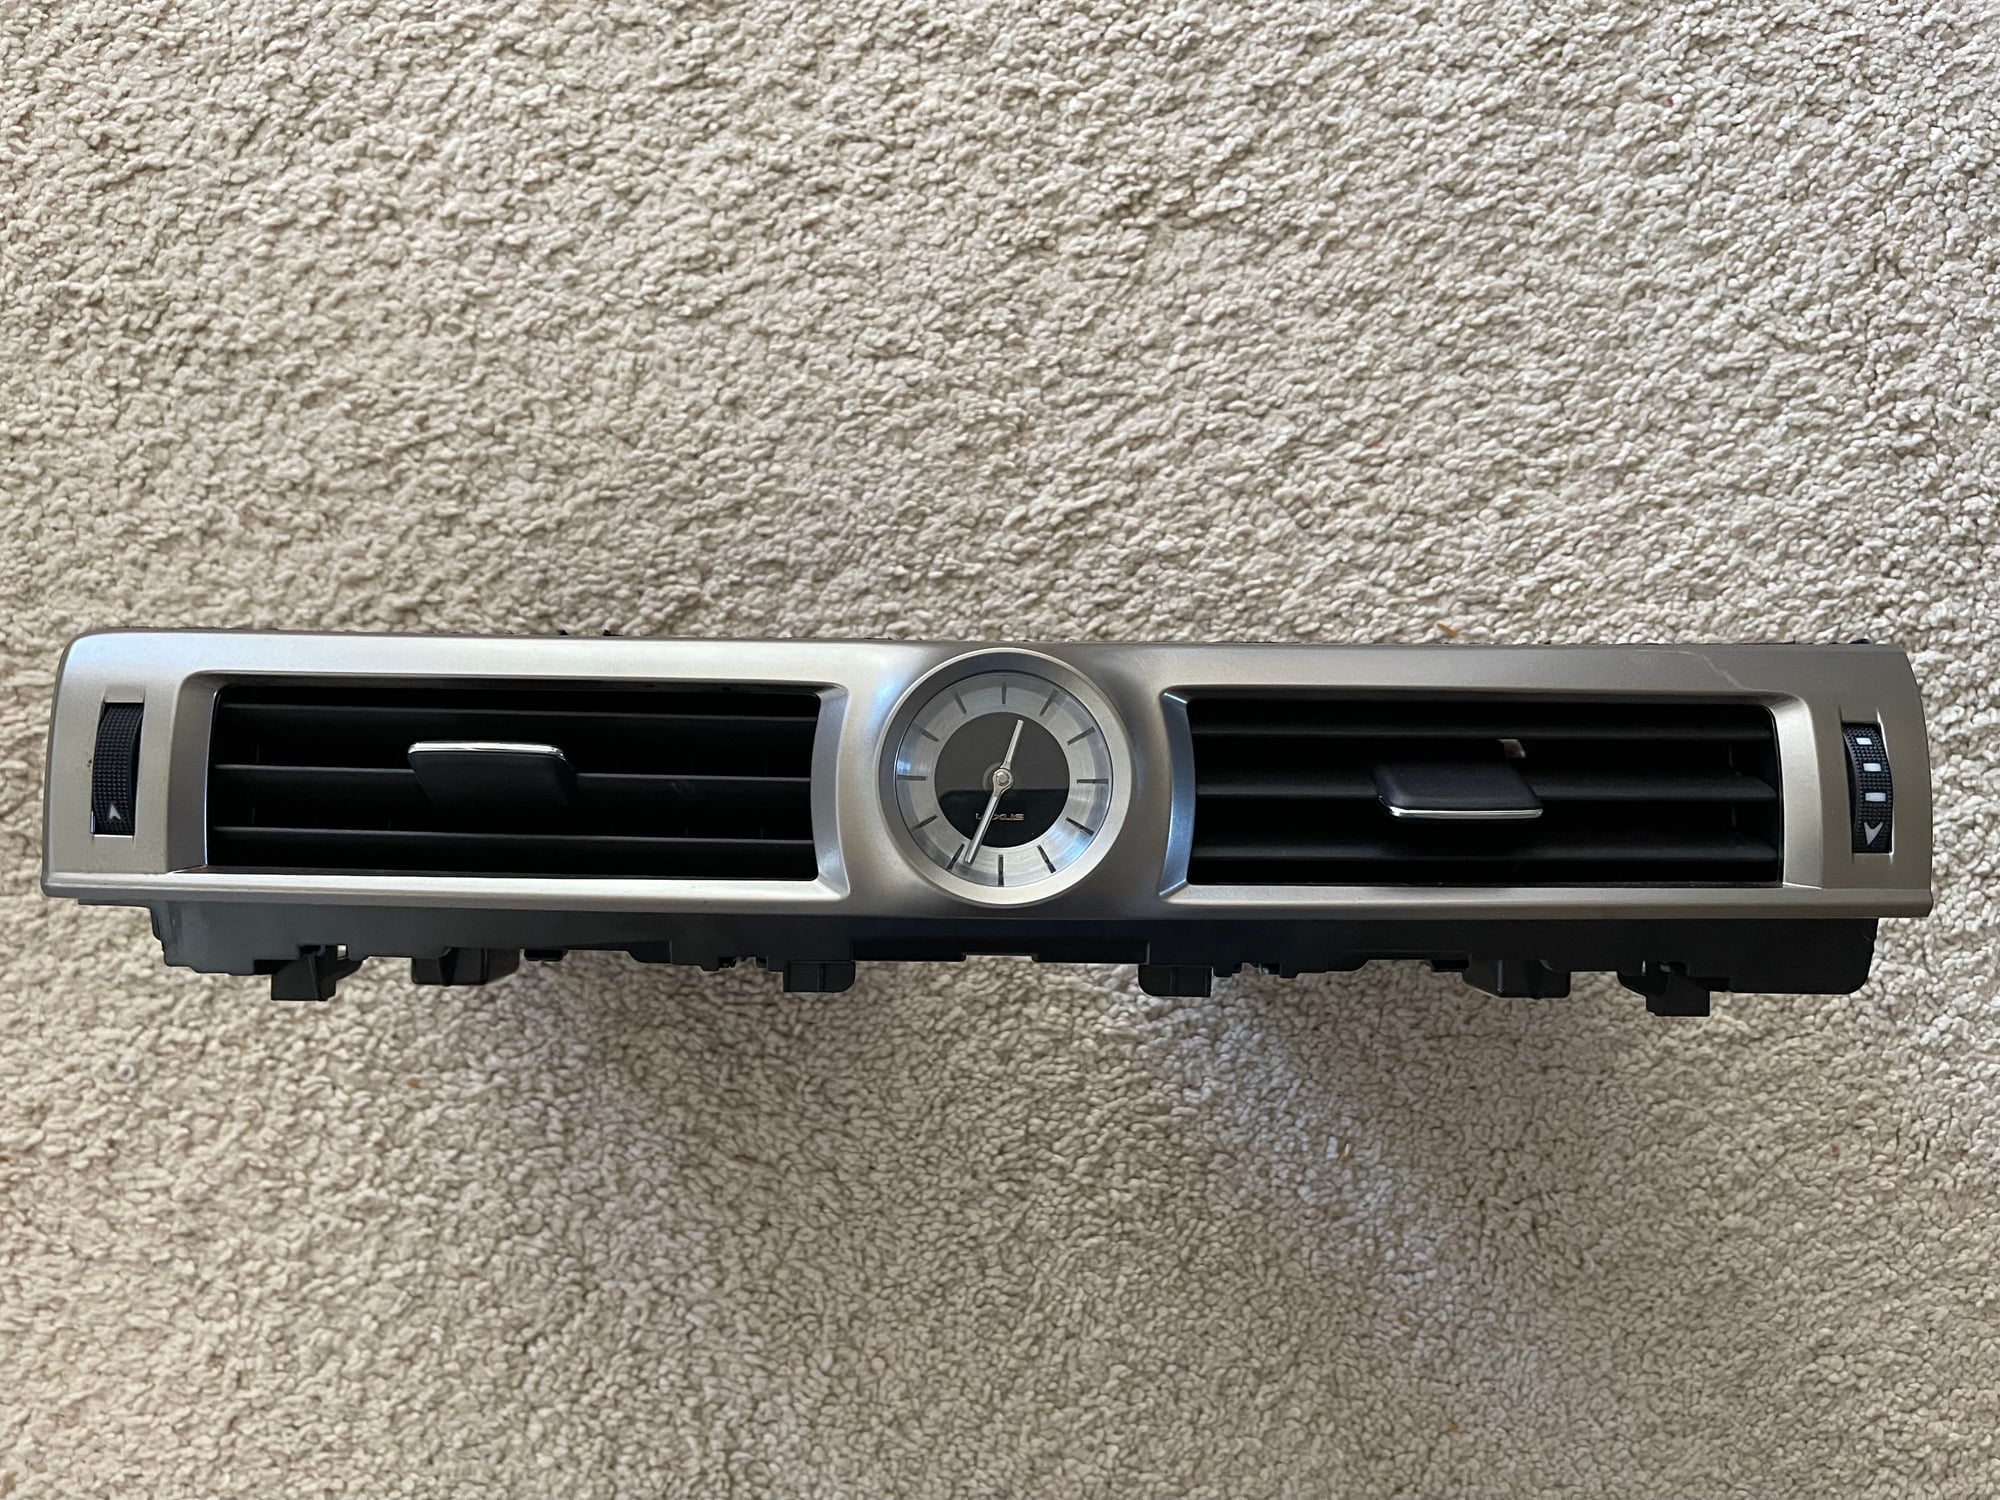 Audio Video/Electronics - 2016+ GS air vent clock - Used - 2013 to 2021 Lexus GS - Charlotte, NC 28227, United States